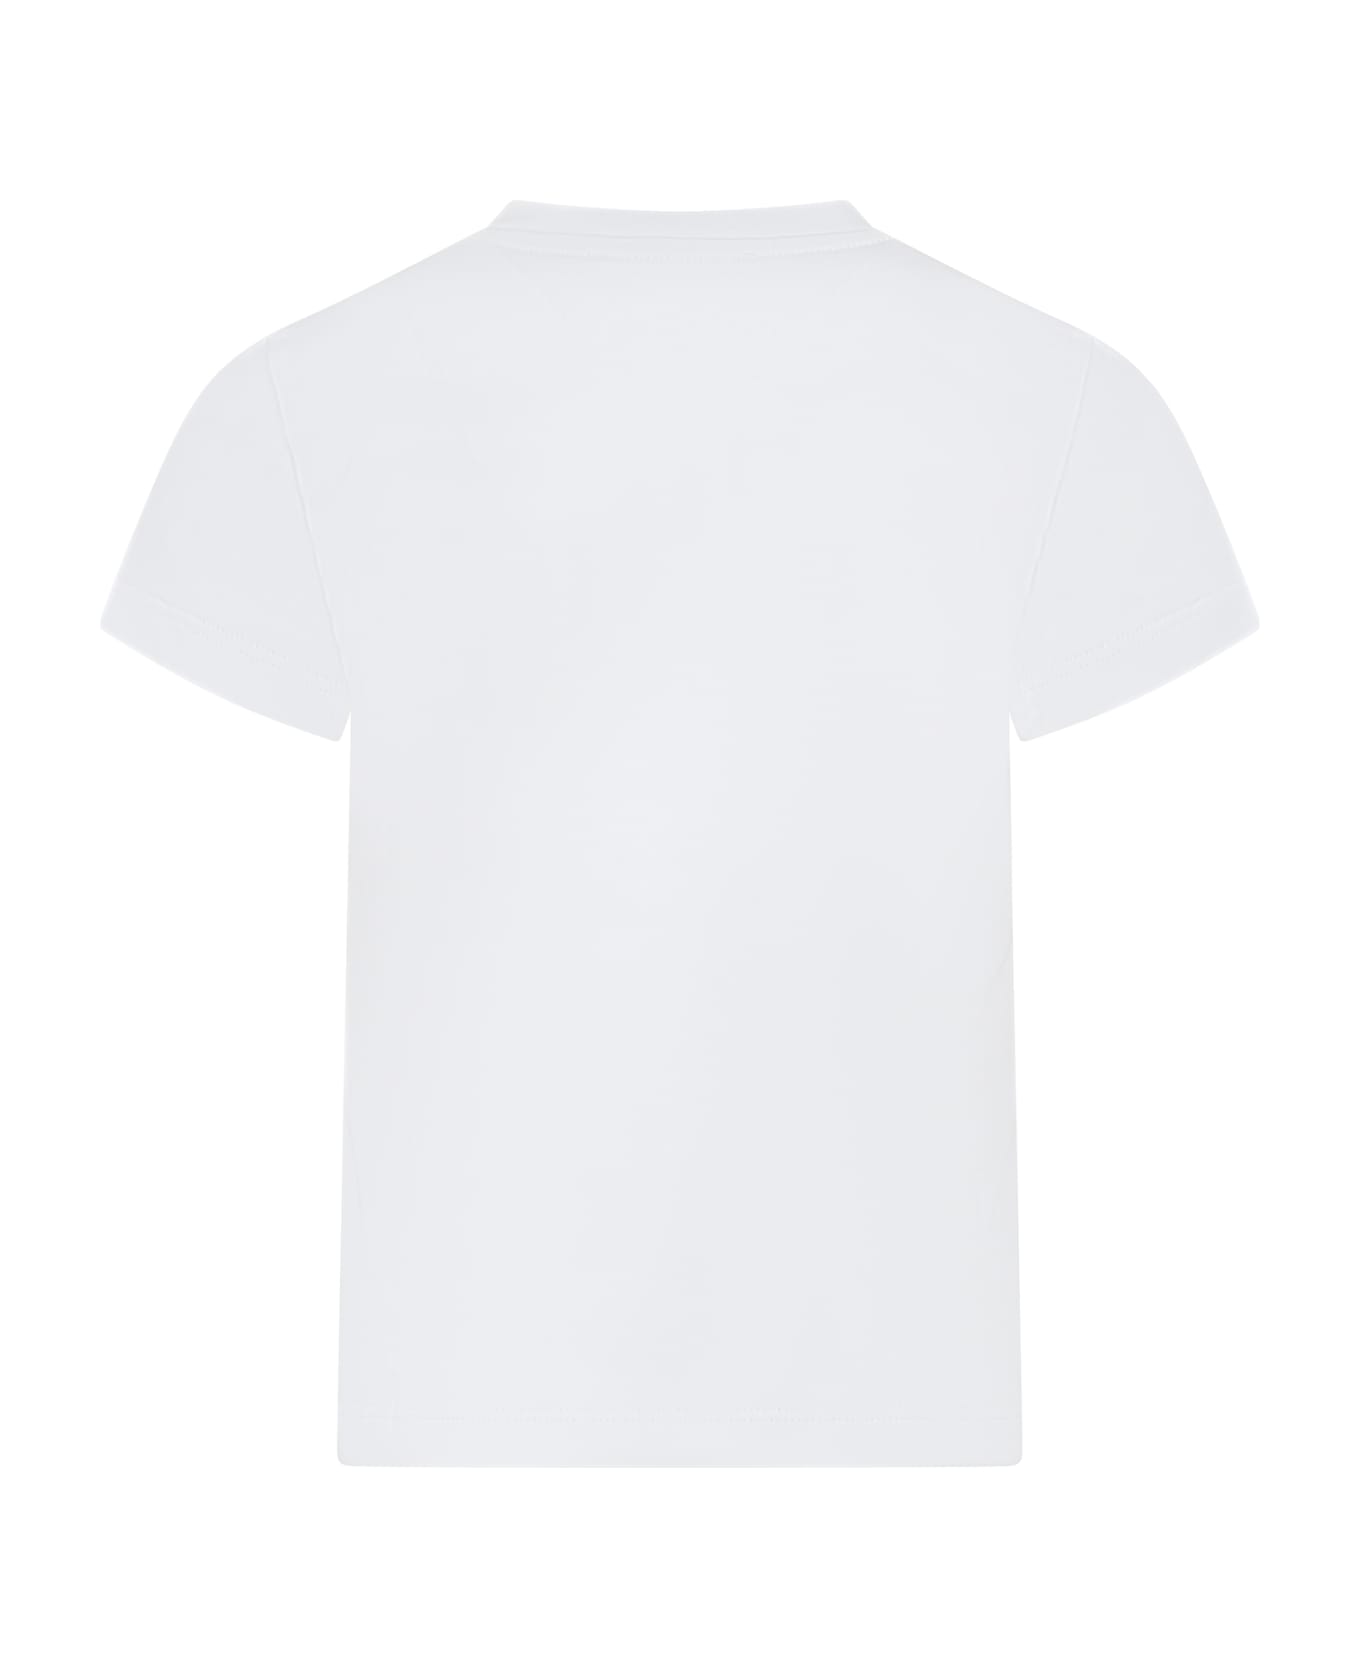 Versace White T-shirt For Girl With Logo - White